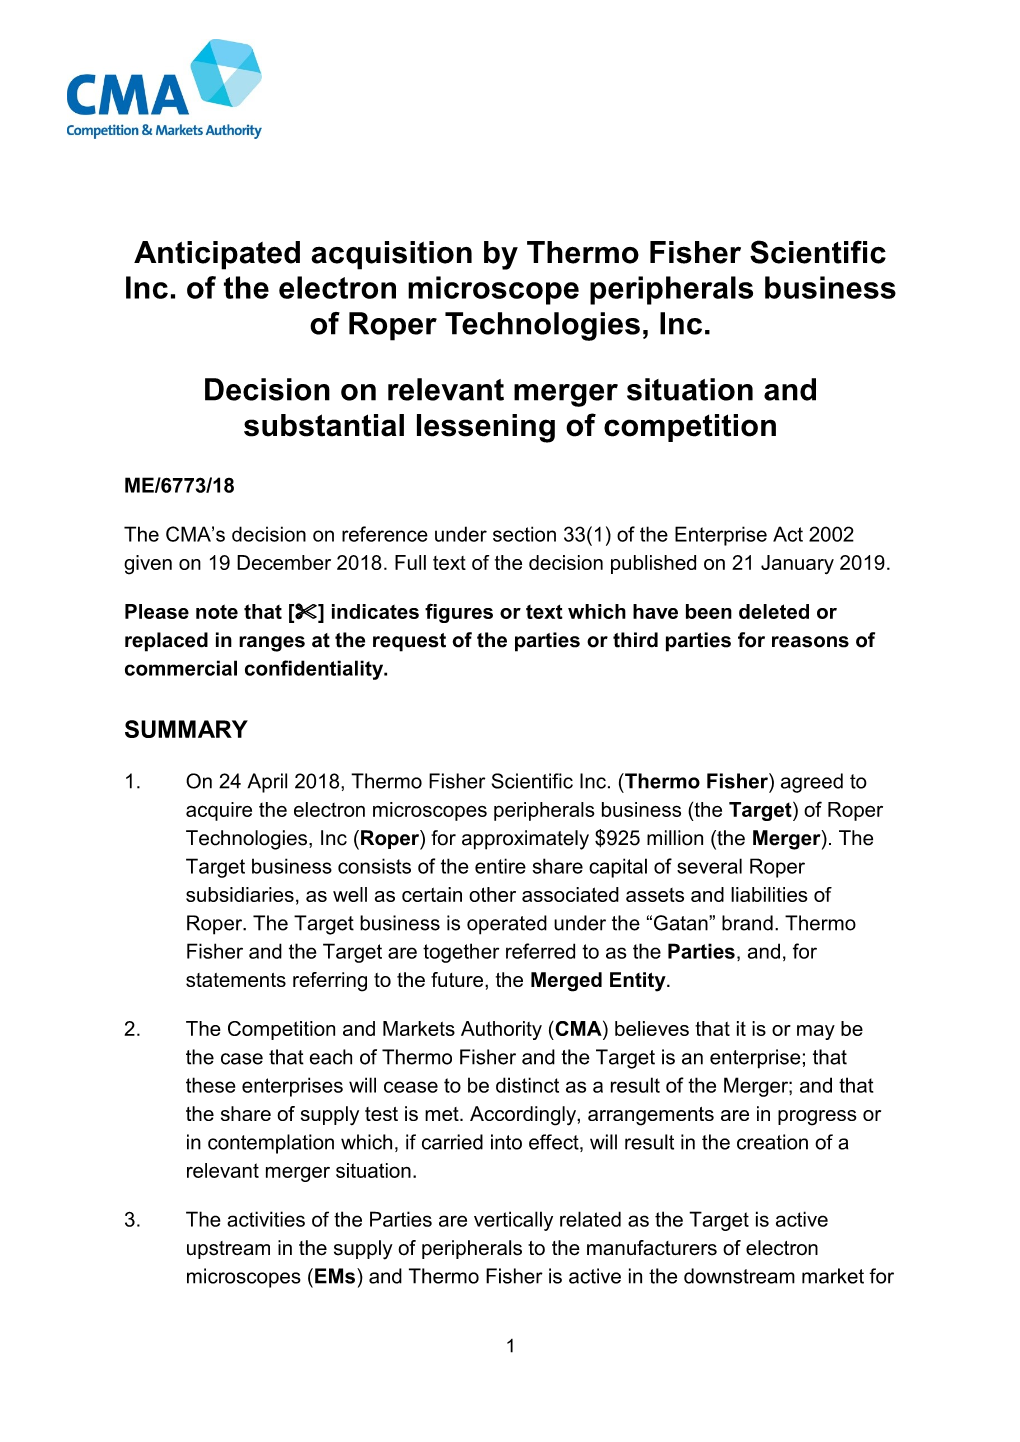 Anticipated Acquisition by Thermo Fisher Scientific Inc